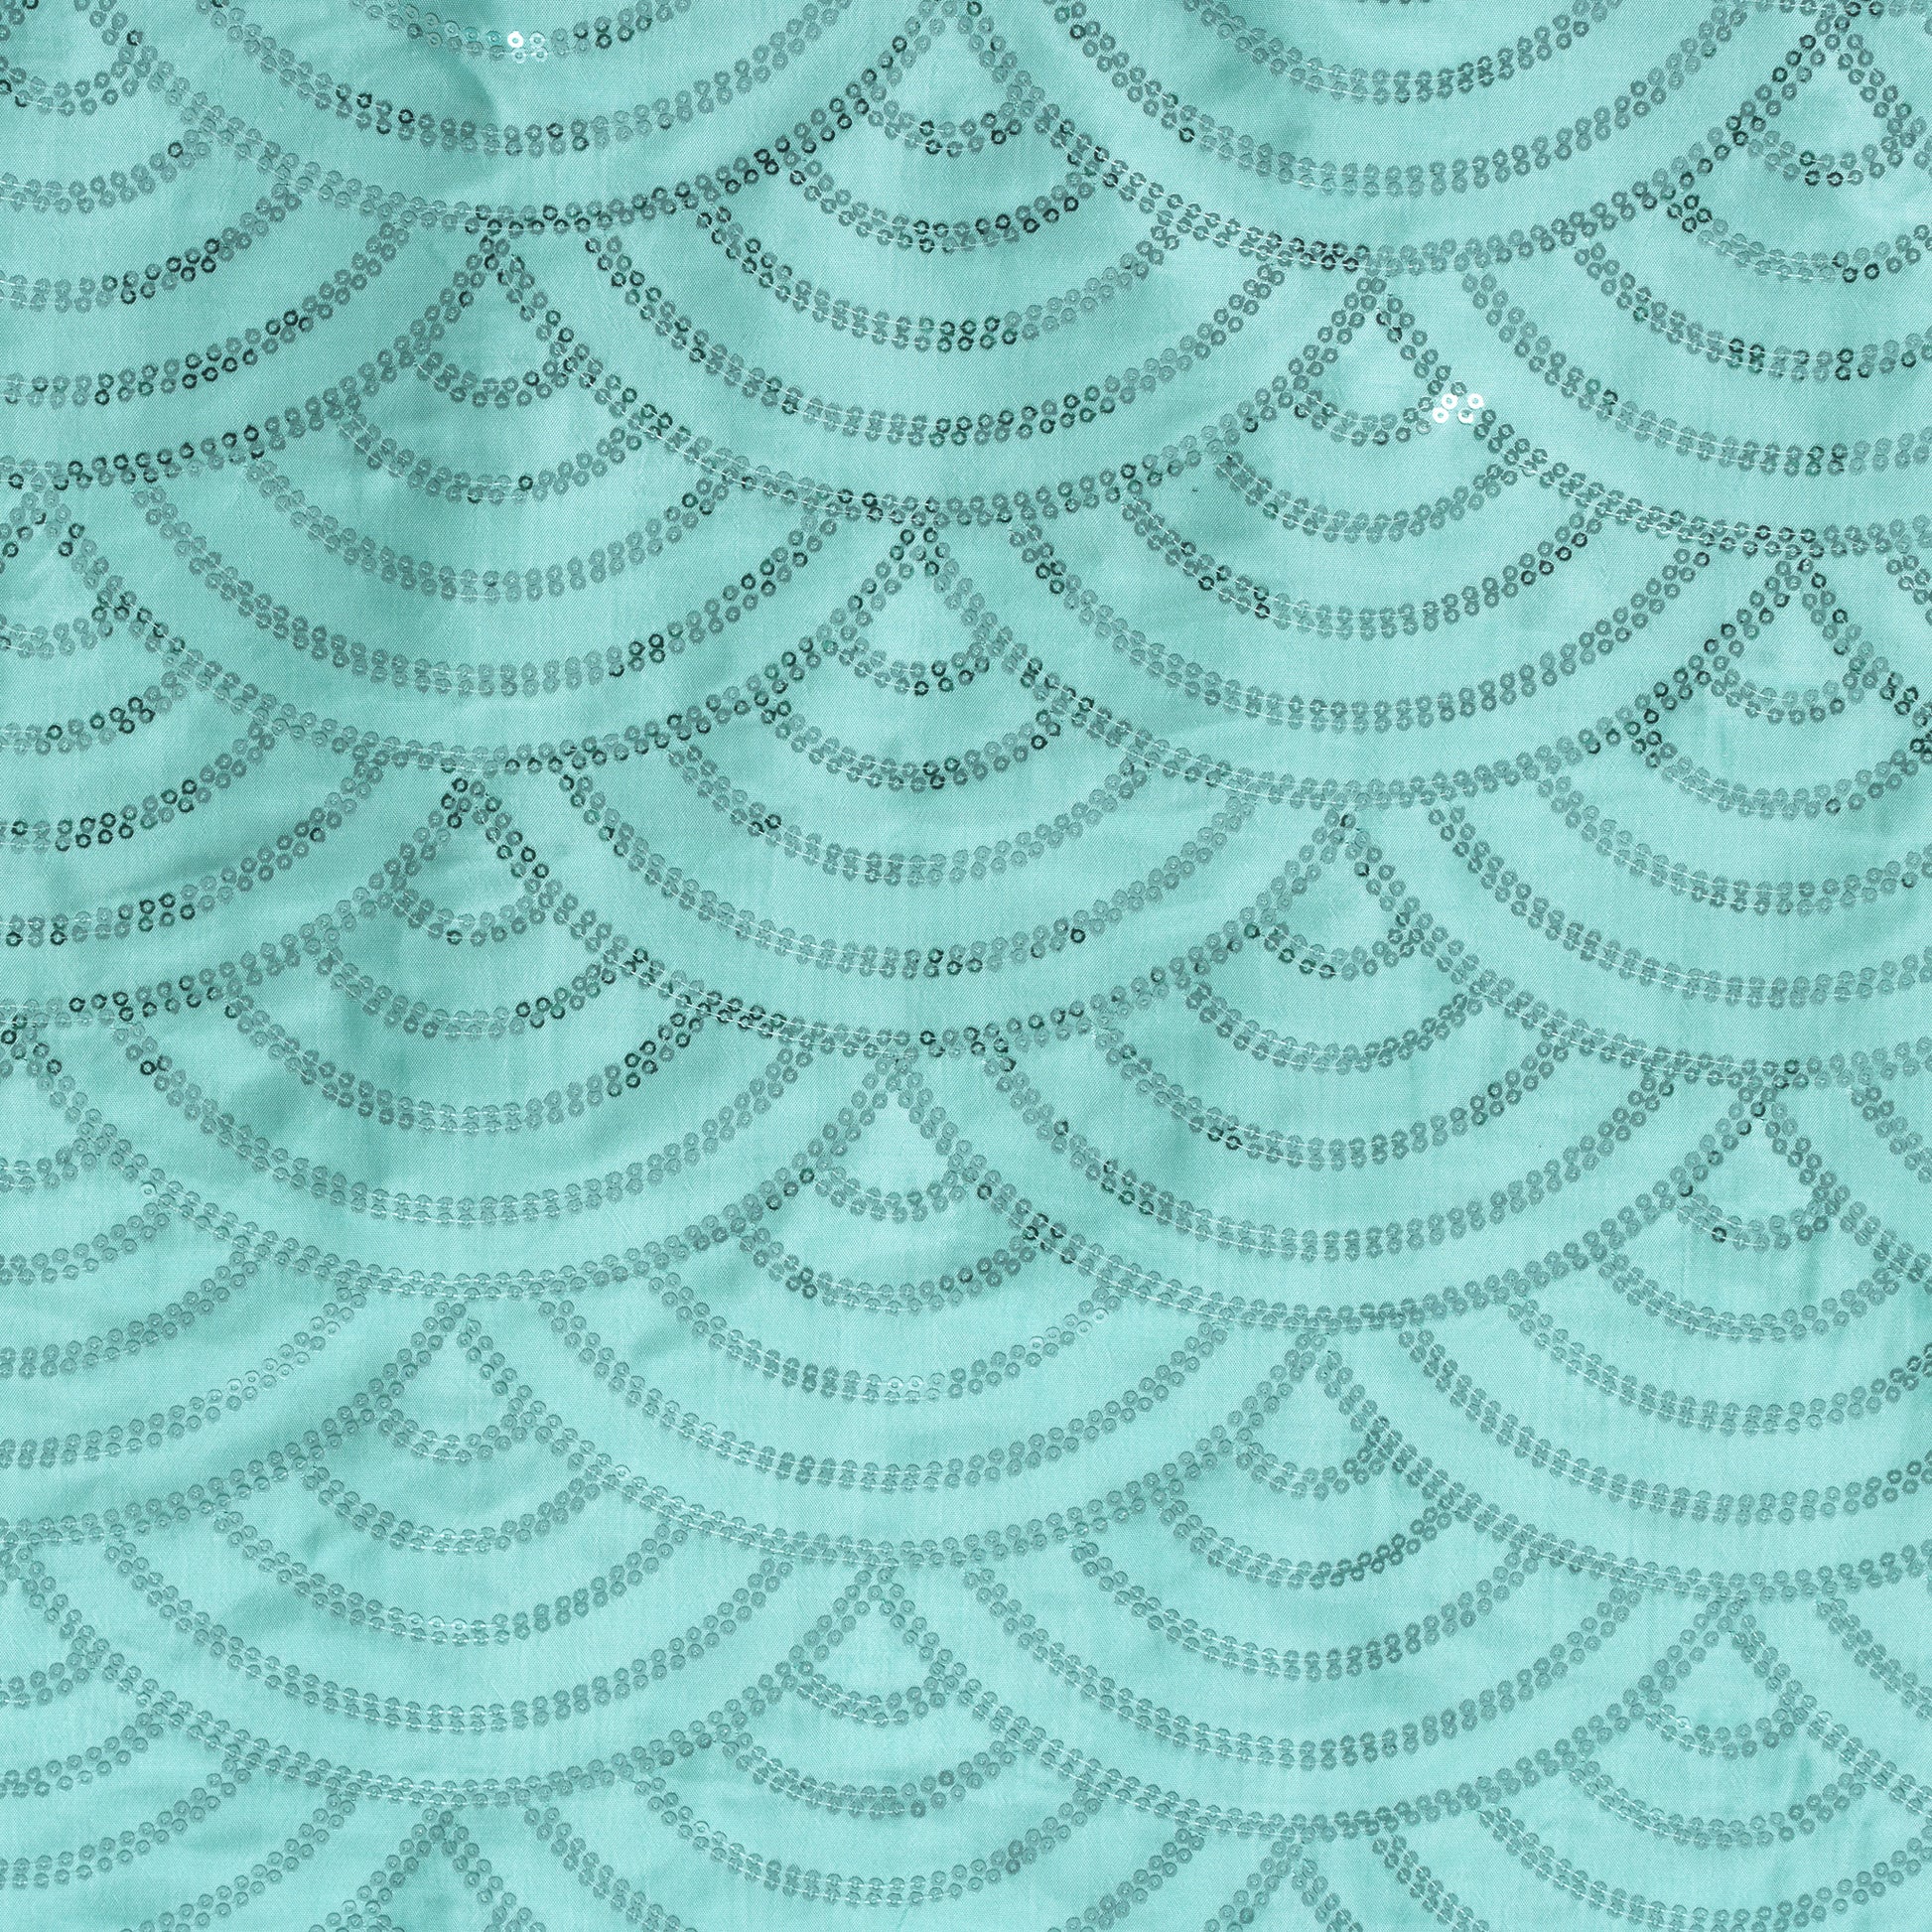 Mermaid Scale Sequin Fabric Roll 10 yards - Turquoise - CV Linens